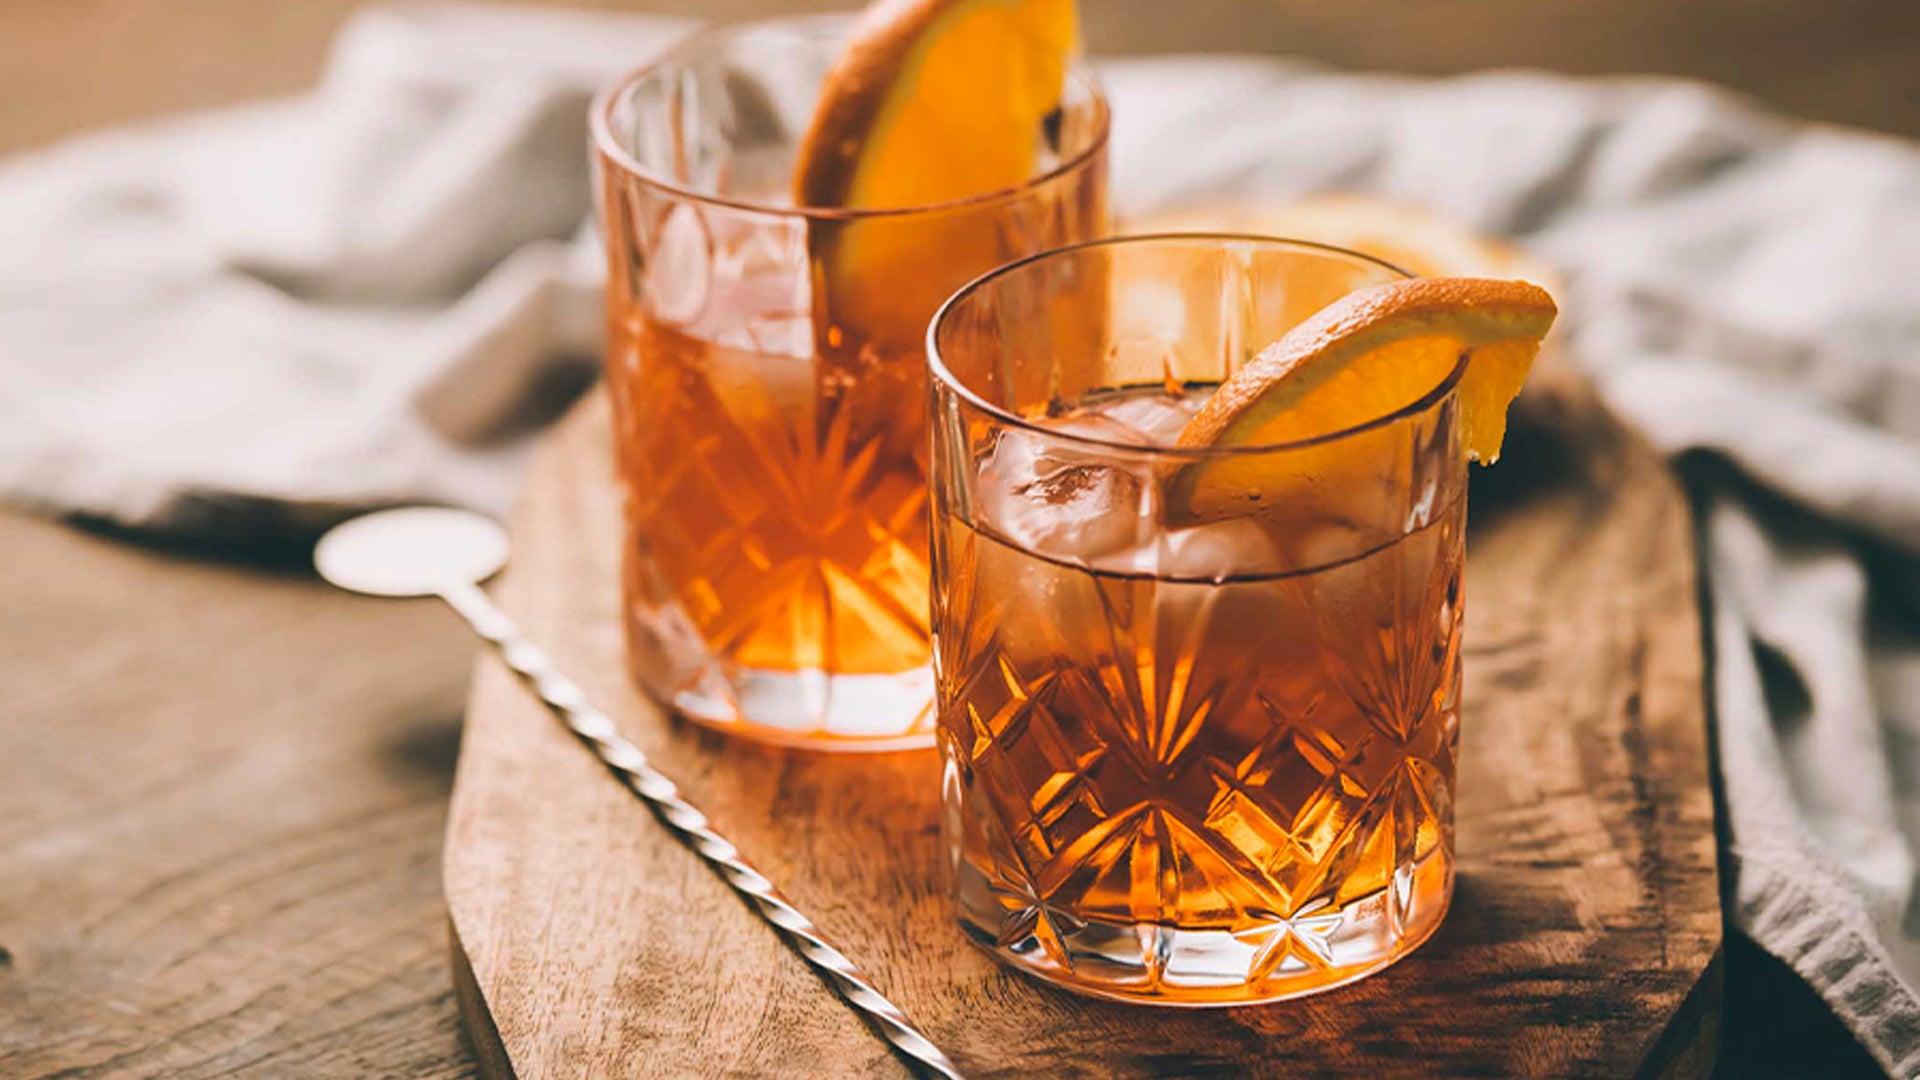 Unwind with These Popular Irish Whiskey Cocktail Recipes